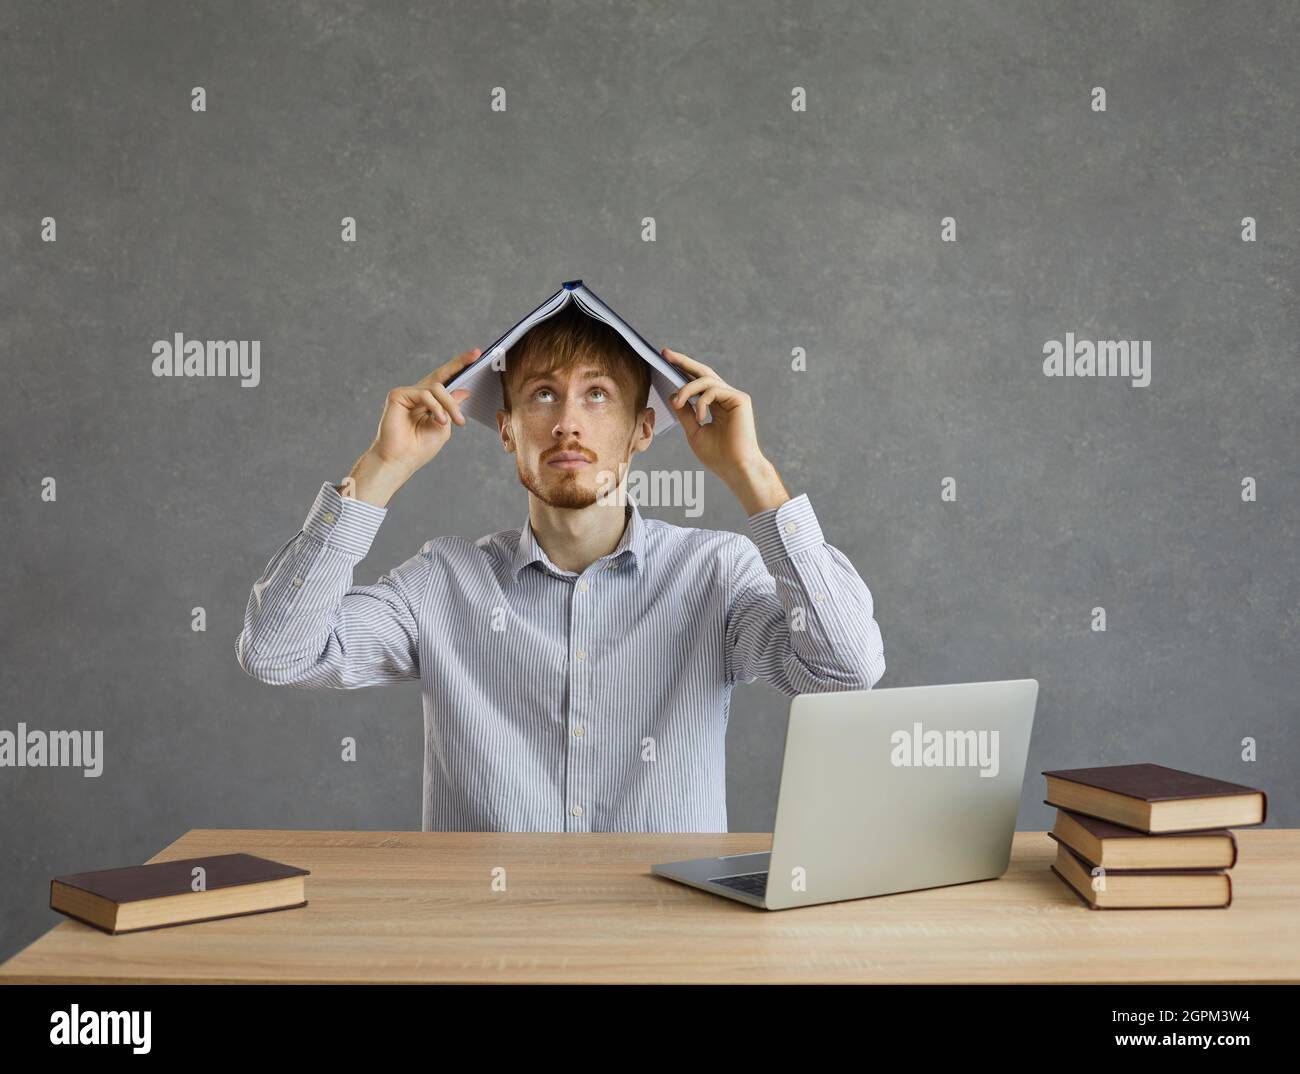 Male student with a pleading look on his face looking up holding a book on his head. Stock Photo